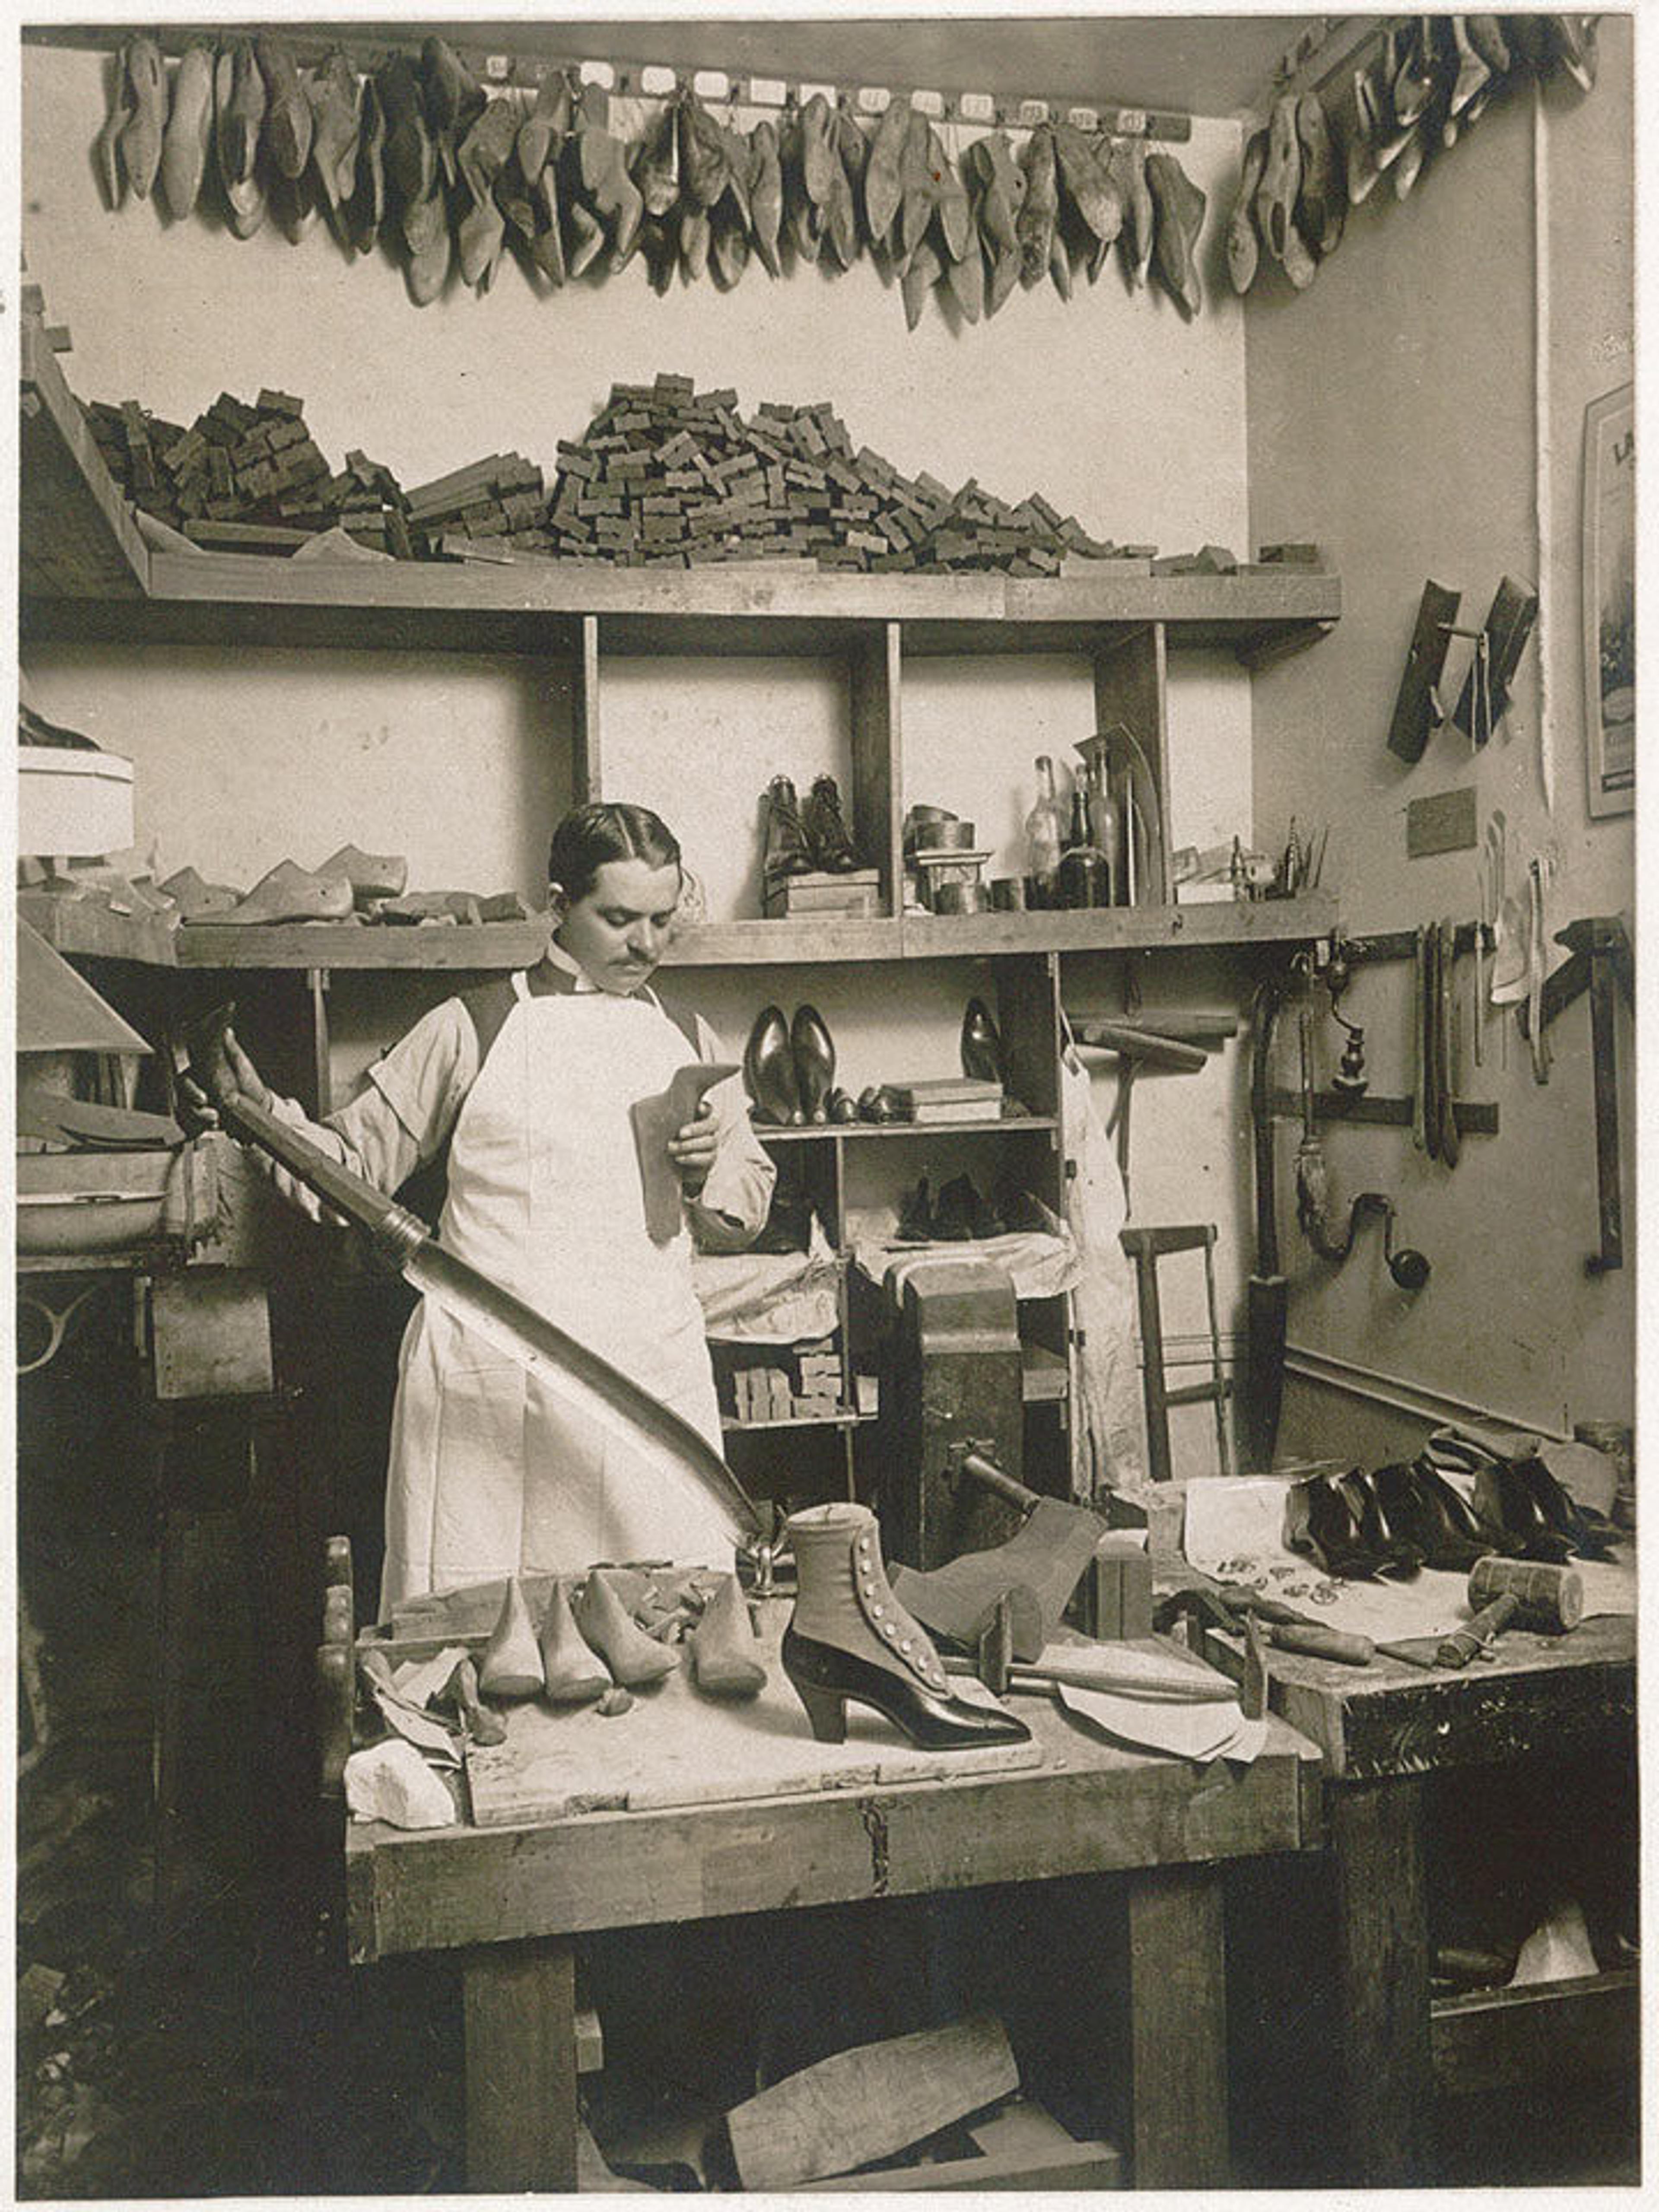 A middle-aged man in a shoemaker's studio holding a last in one hand and the handle of a knife used for rough cutting lasts